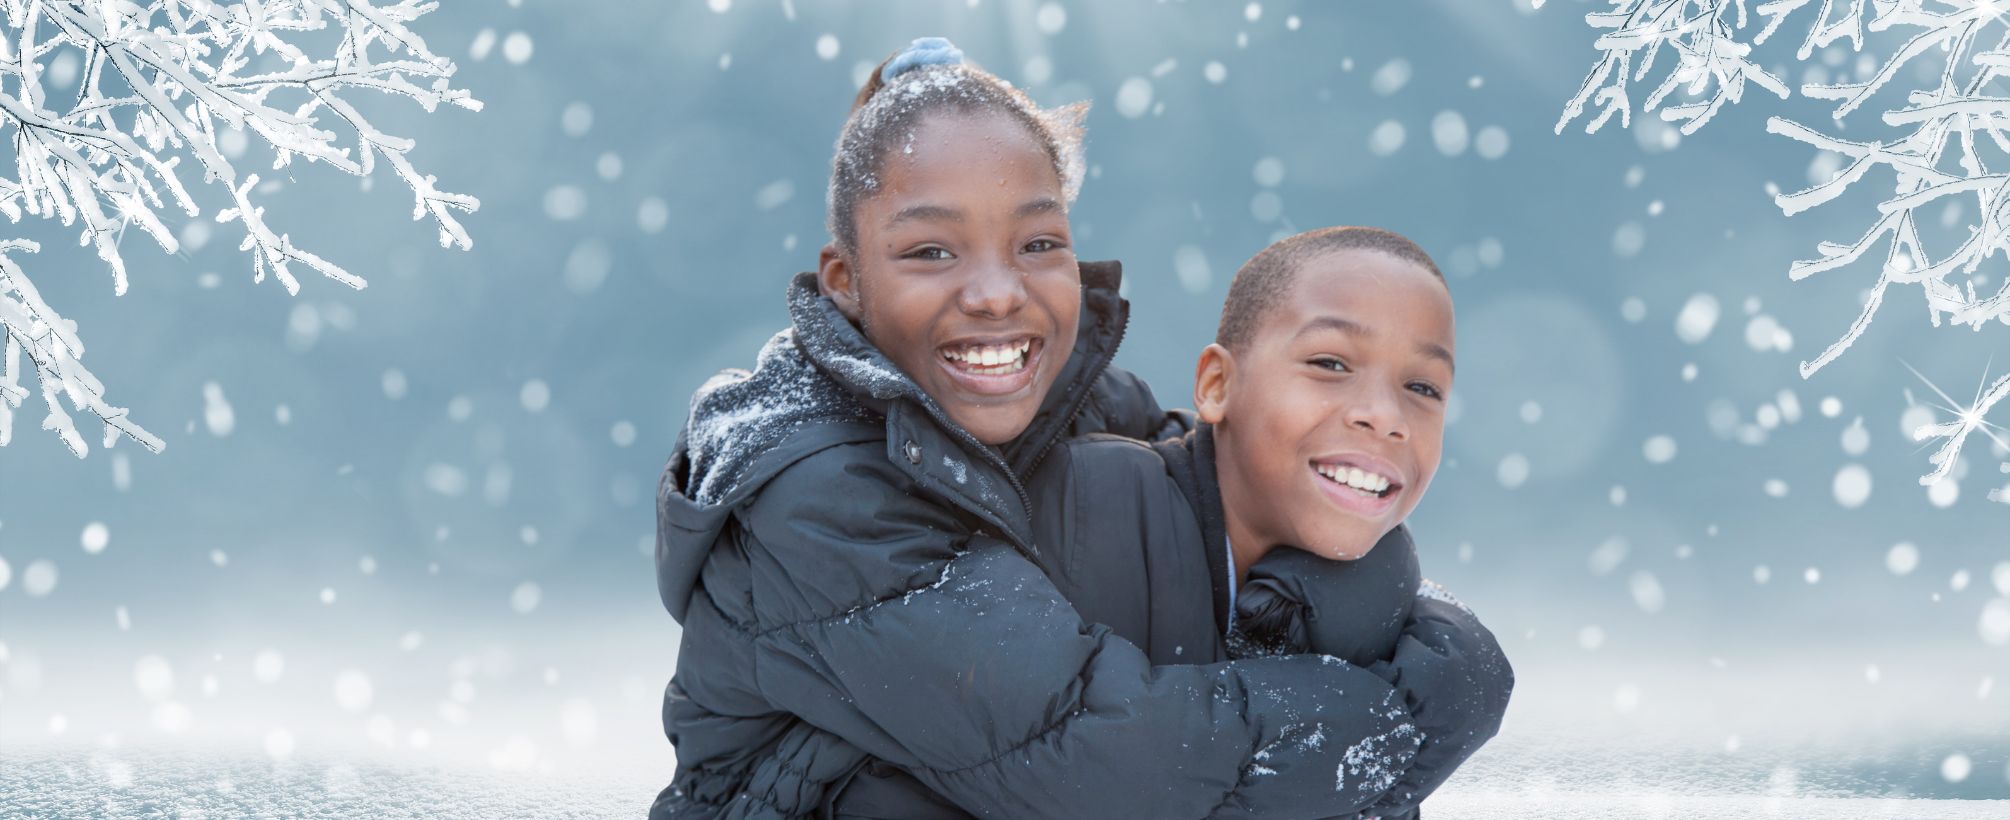 An image with two kids hugging each other and smiling, the background is blue with snow.